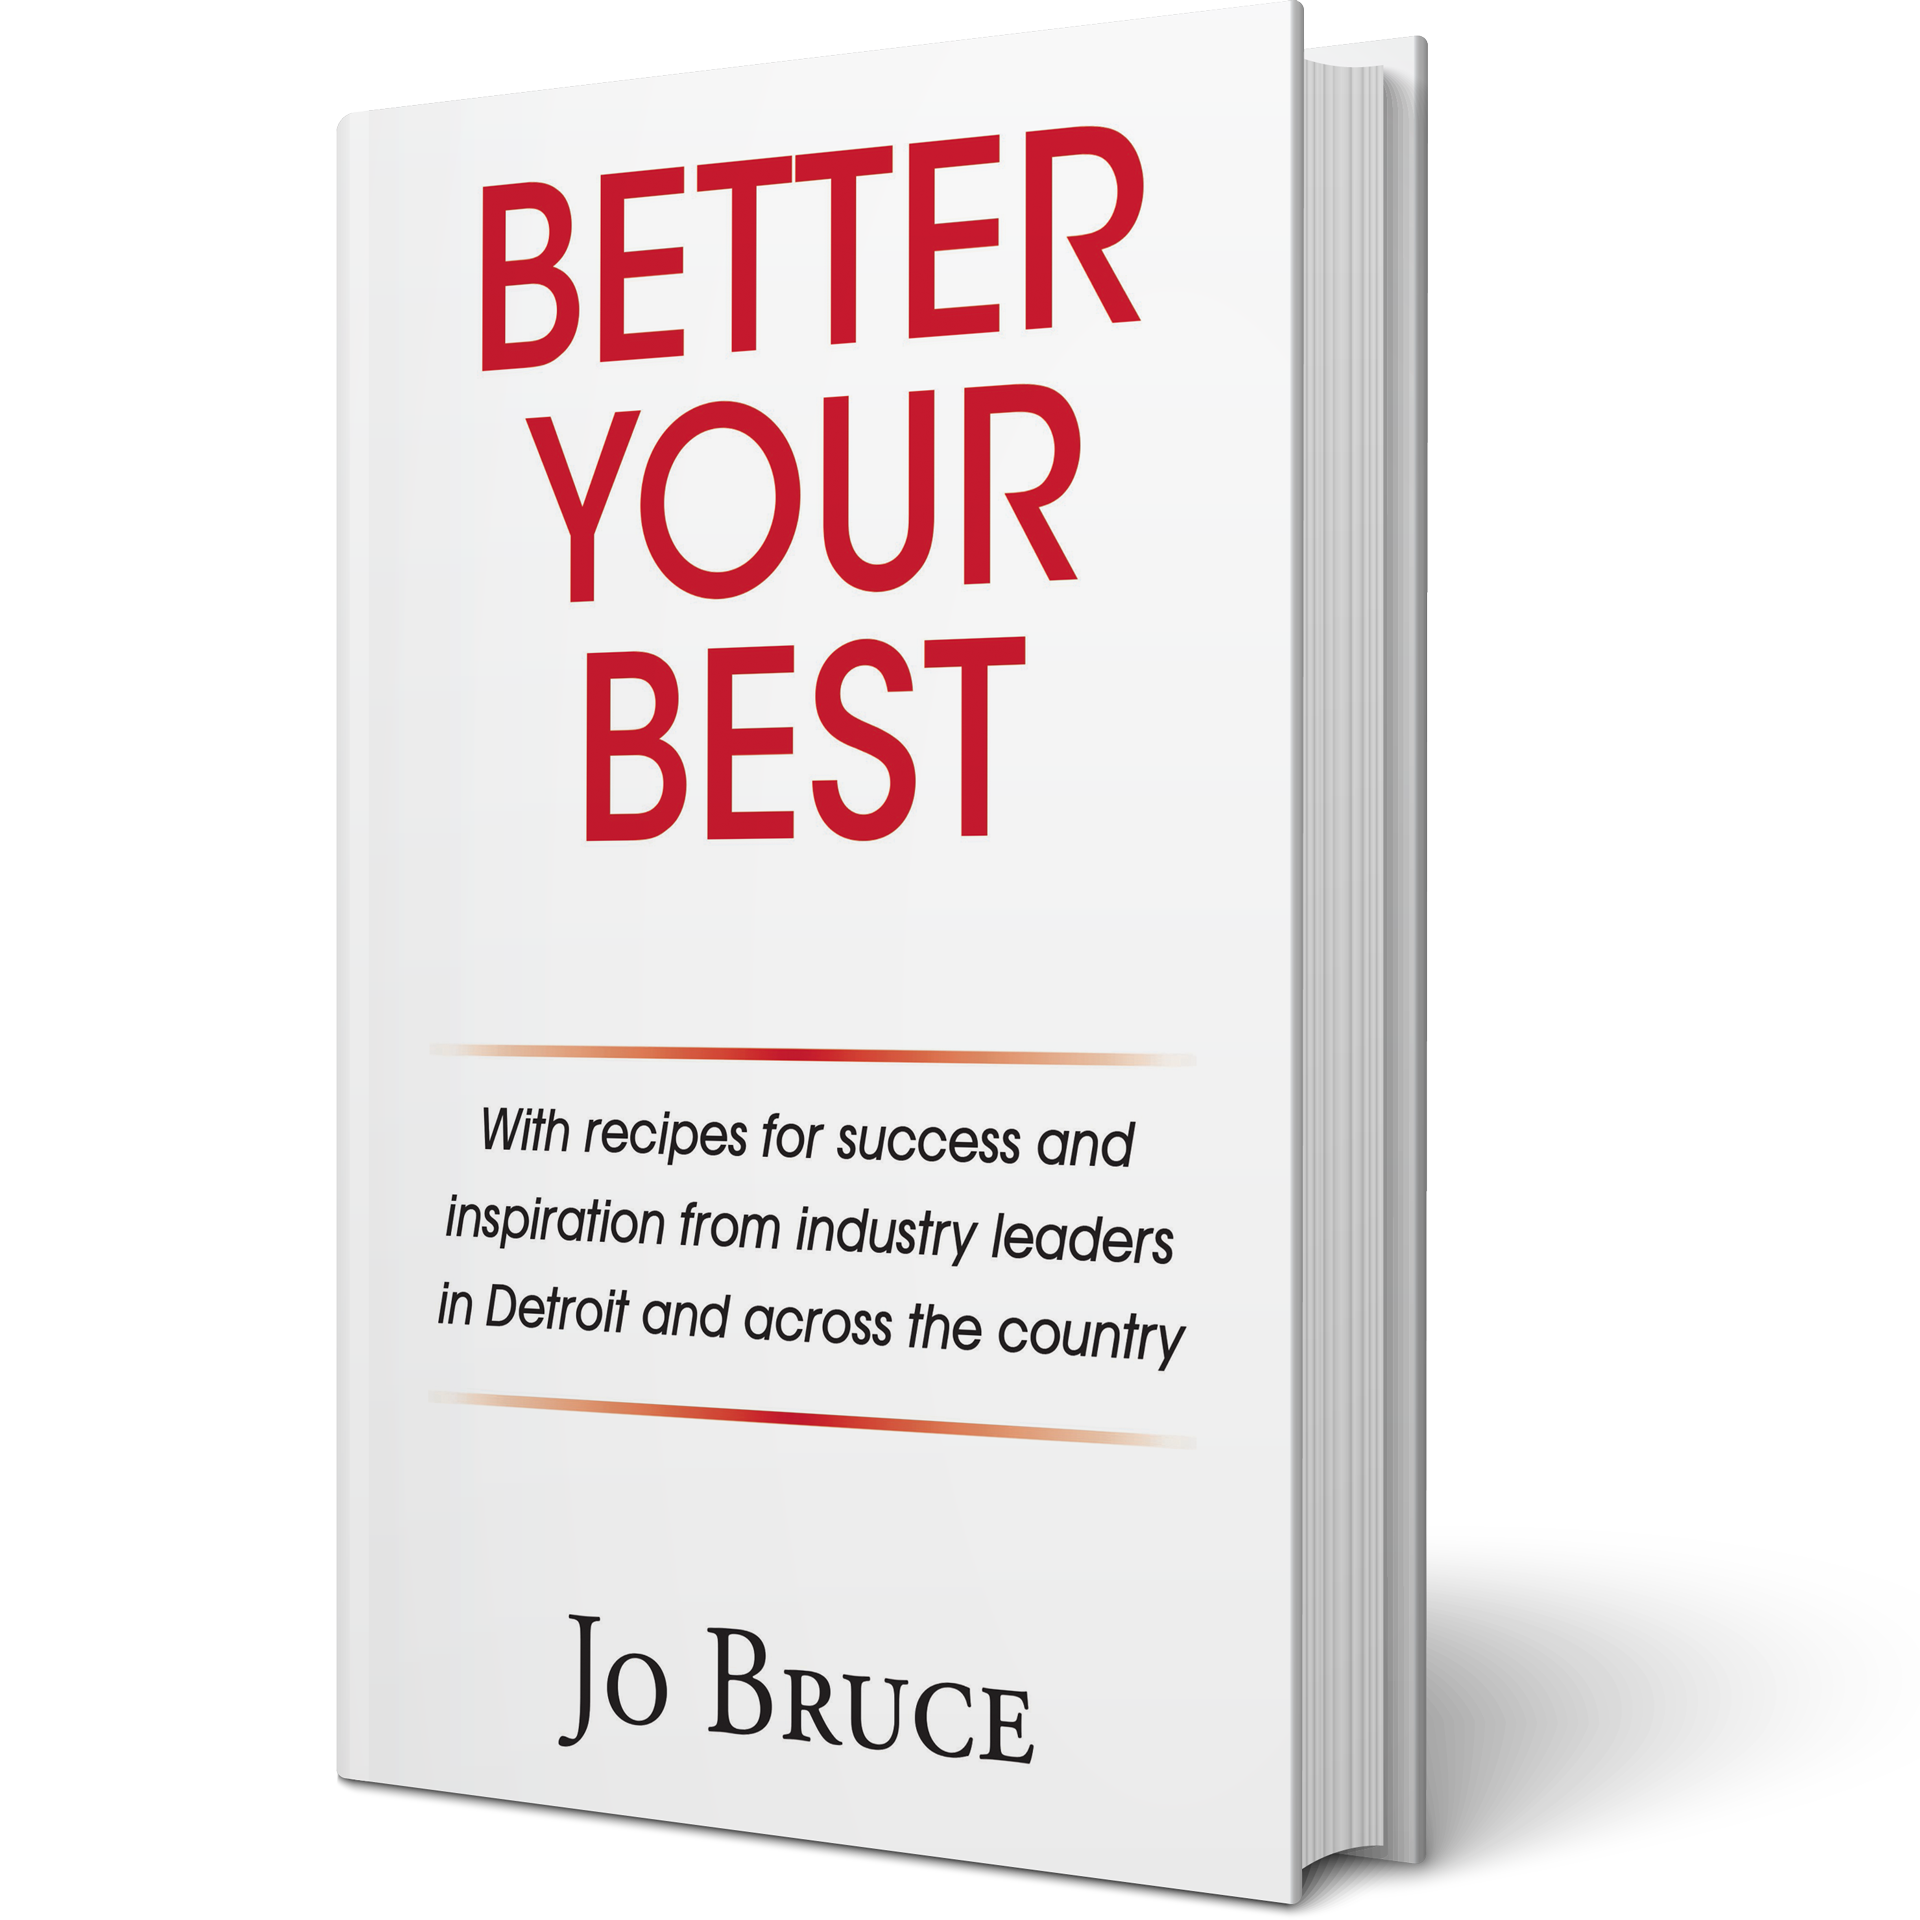 Better Your Best Book Cover by Jo Bruce